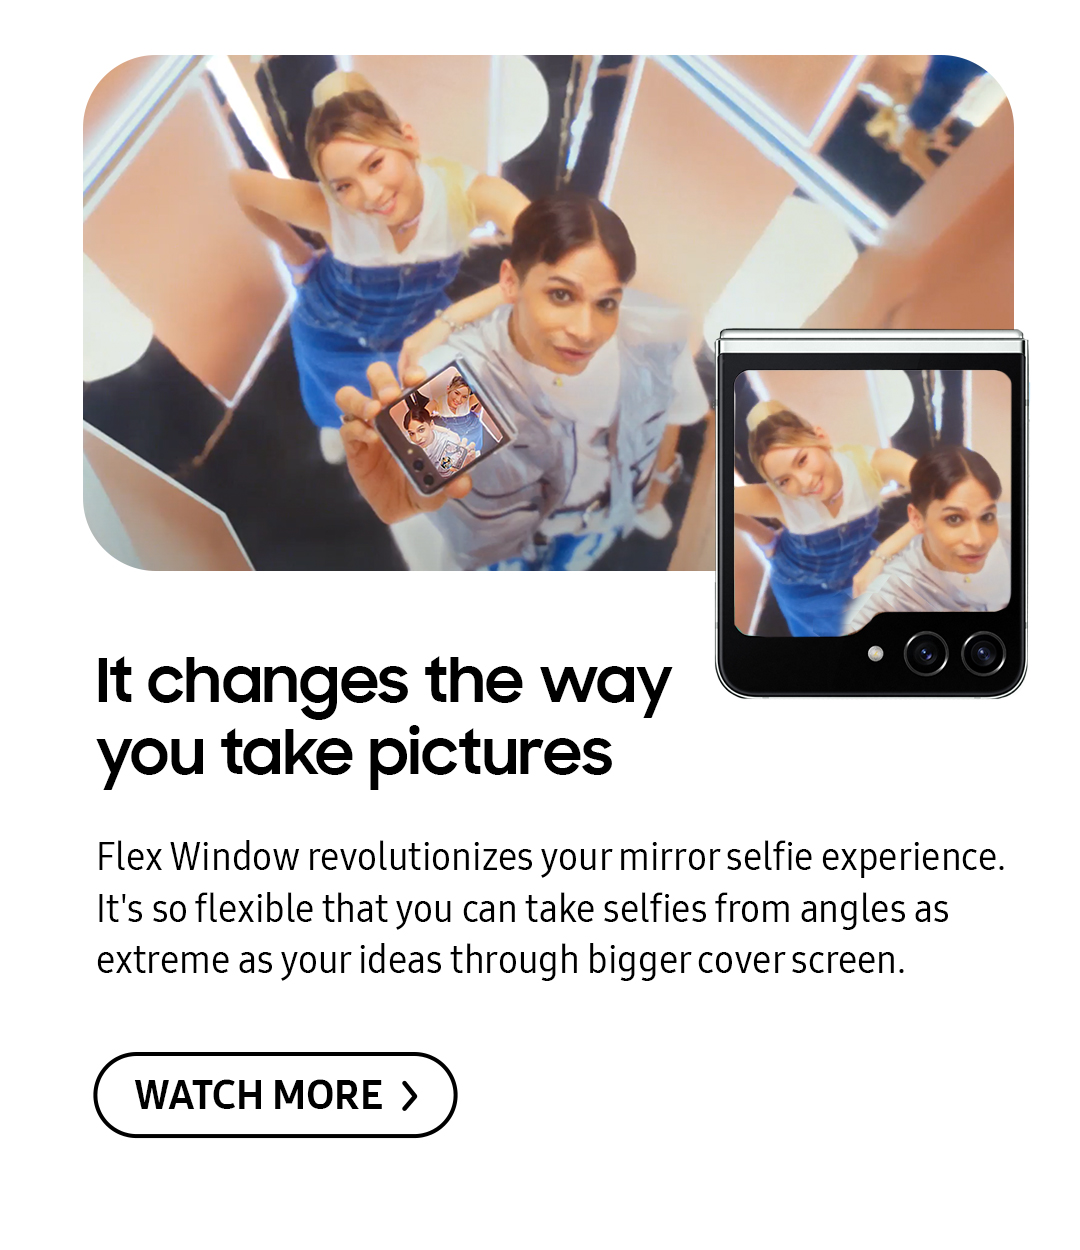 It changes the way you take pictures | Flex Window revolutionizes your mirror selfie experience. It's so flexible that you can take selfies from angles as extreme as your ideas through bigger cover screen. Click here to see it!